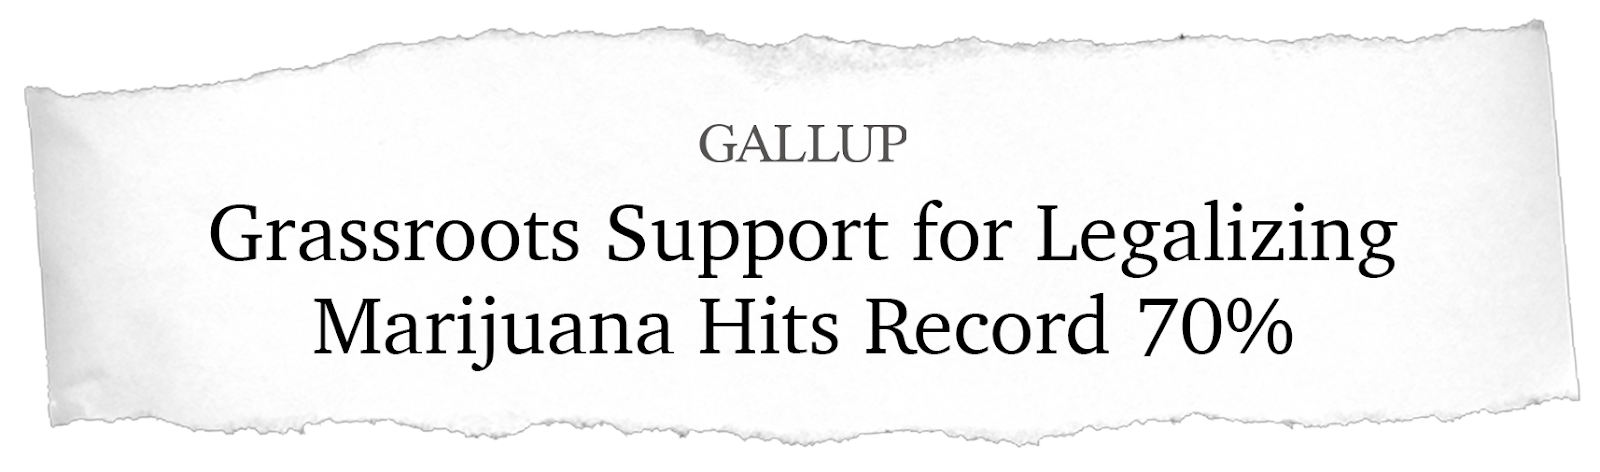 Gallup Headline: "Grassroots Support for Legalizing Marijuana Hits Record 70%"